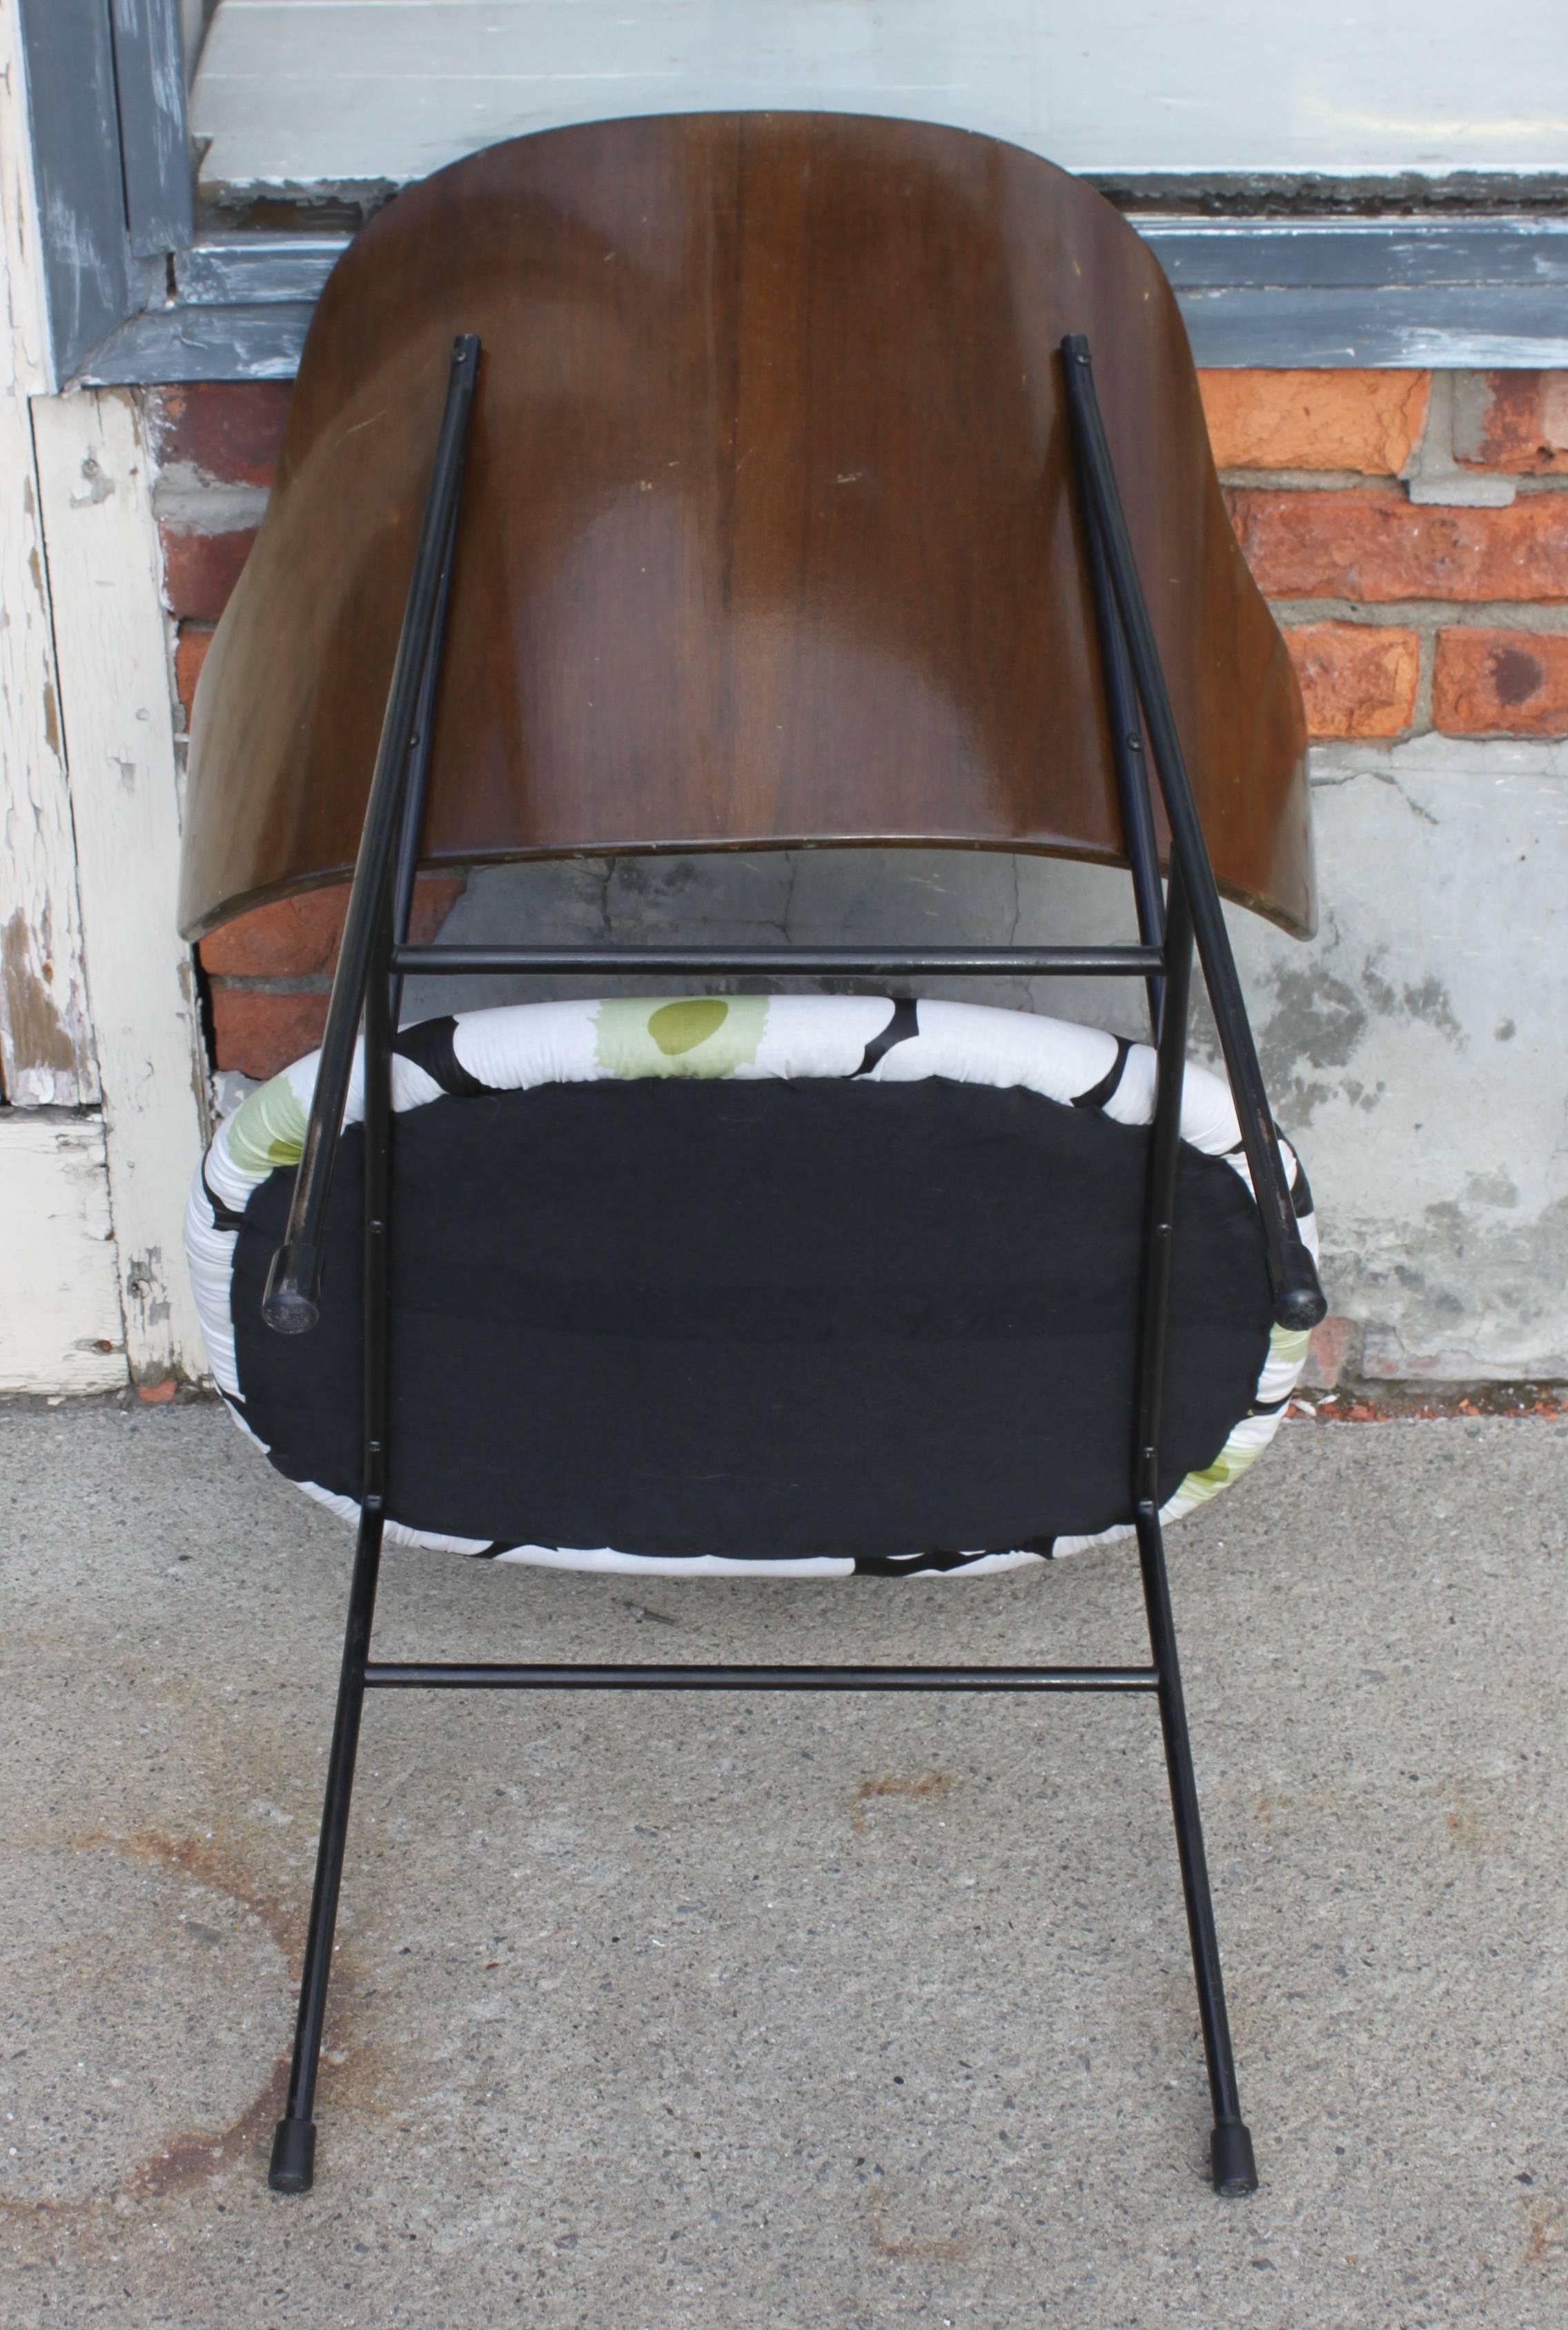 Ib Kofod Larsen 'Penguin' Chair with Marimekko Fabric In Excellent Condition For Sale In Hudson, NY